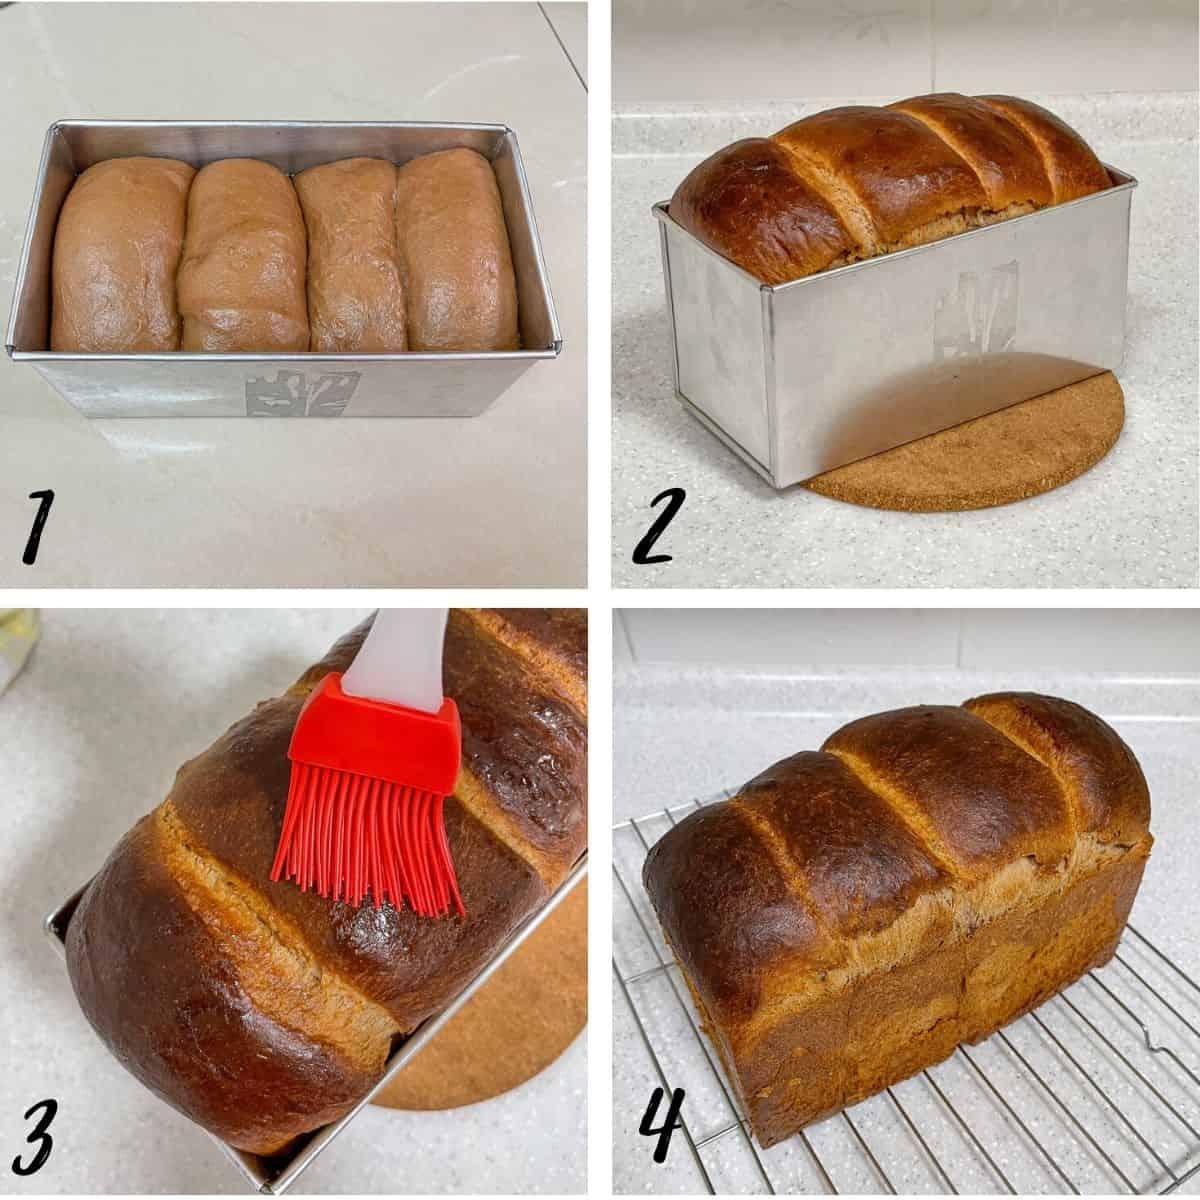 A poster of 4 images showing proofed chocolate brioche bread in a bread tin and a baked brioche loaf on a wire rack.